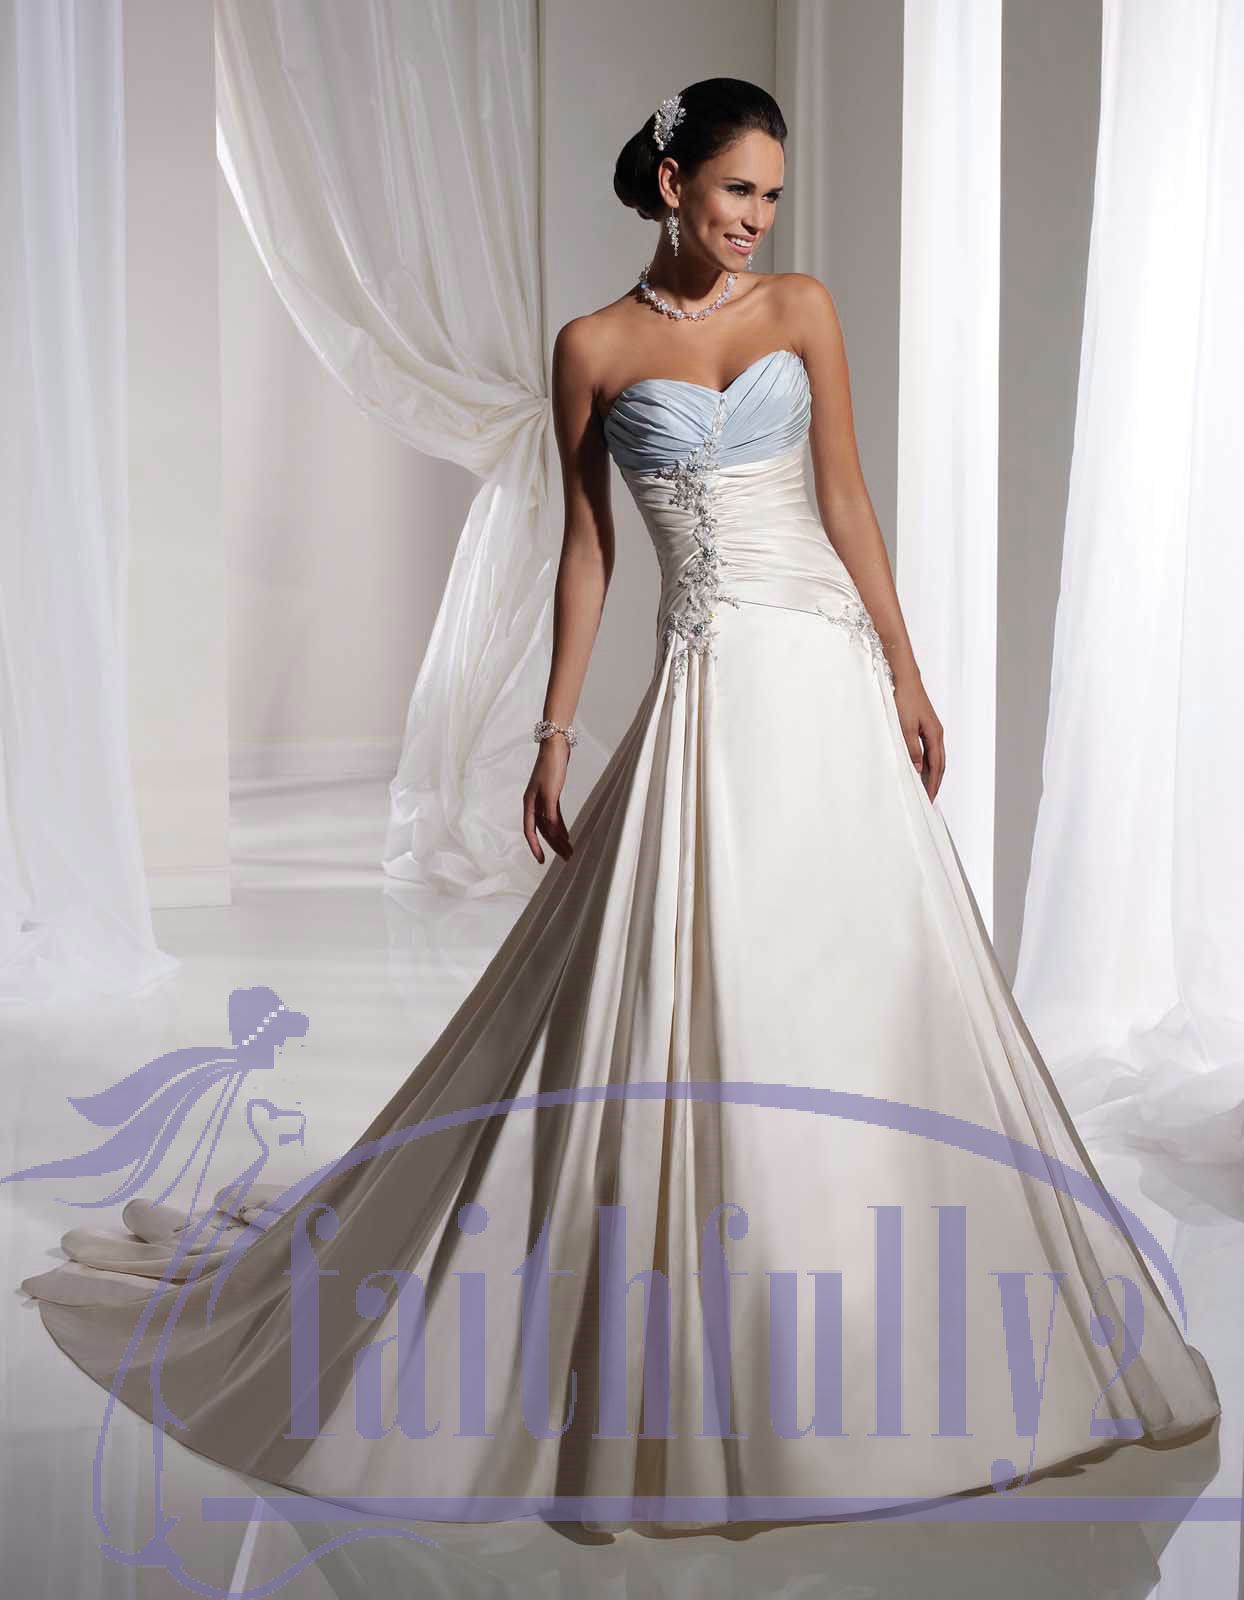 Unique Sky Blue And White Sweetheart Wedding Dresses Draped Bodice